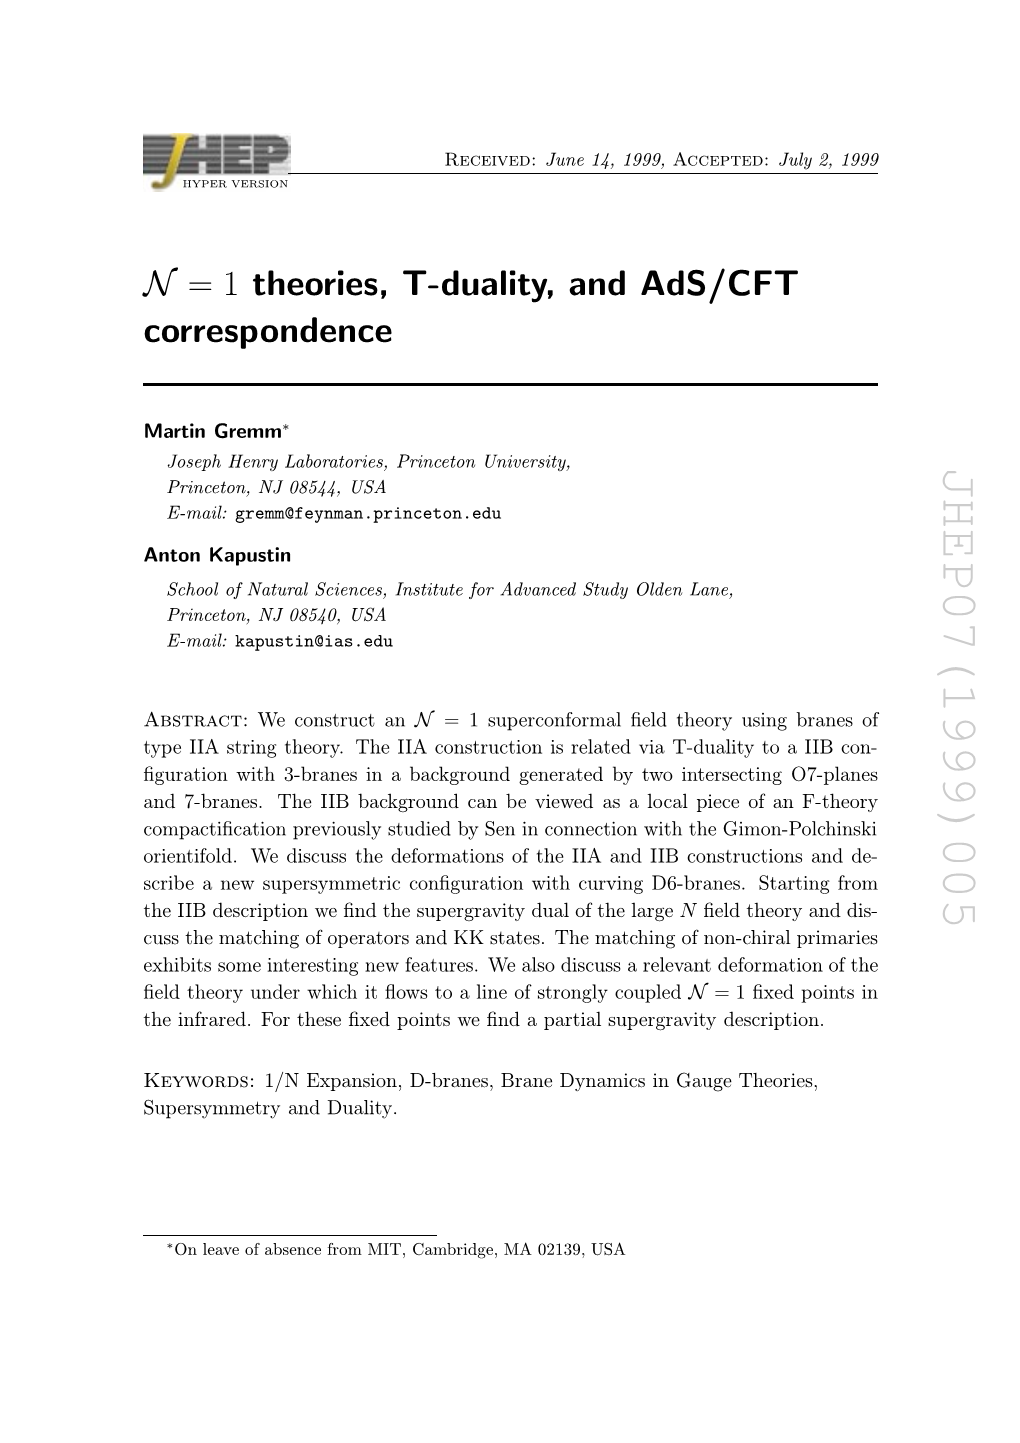 N= 1 Theories, T-Duality, and Ads/CFT Correspondence